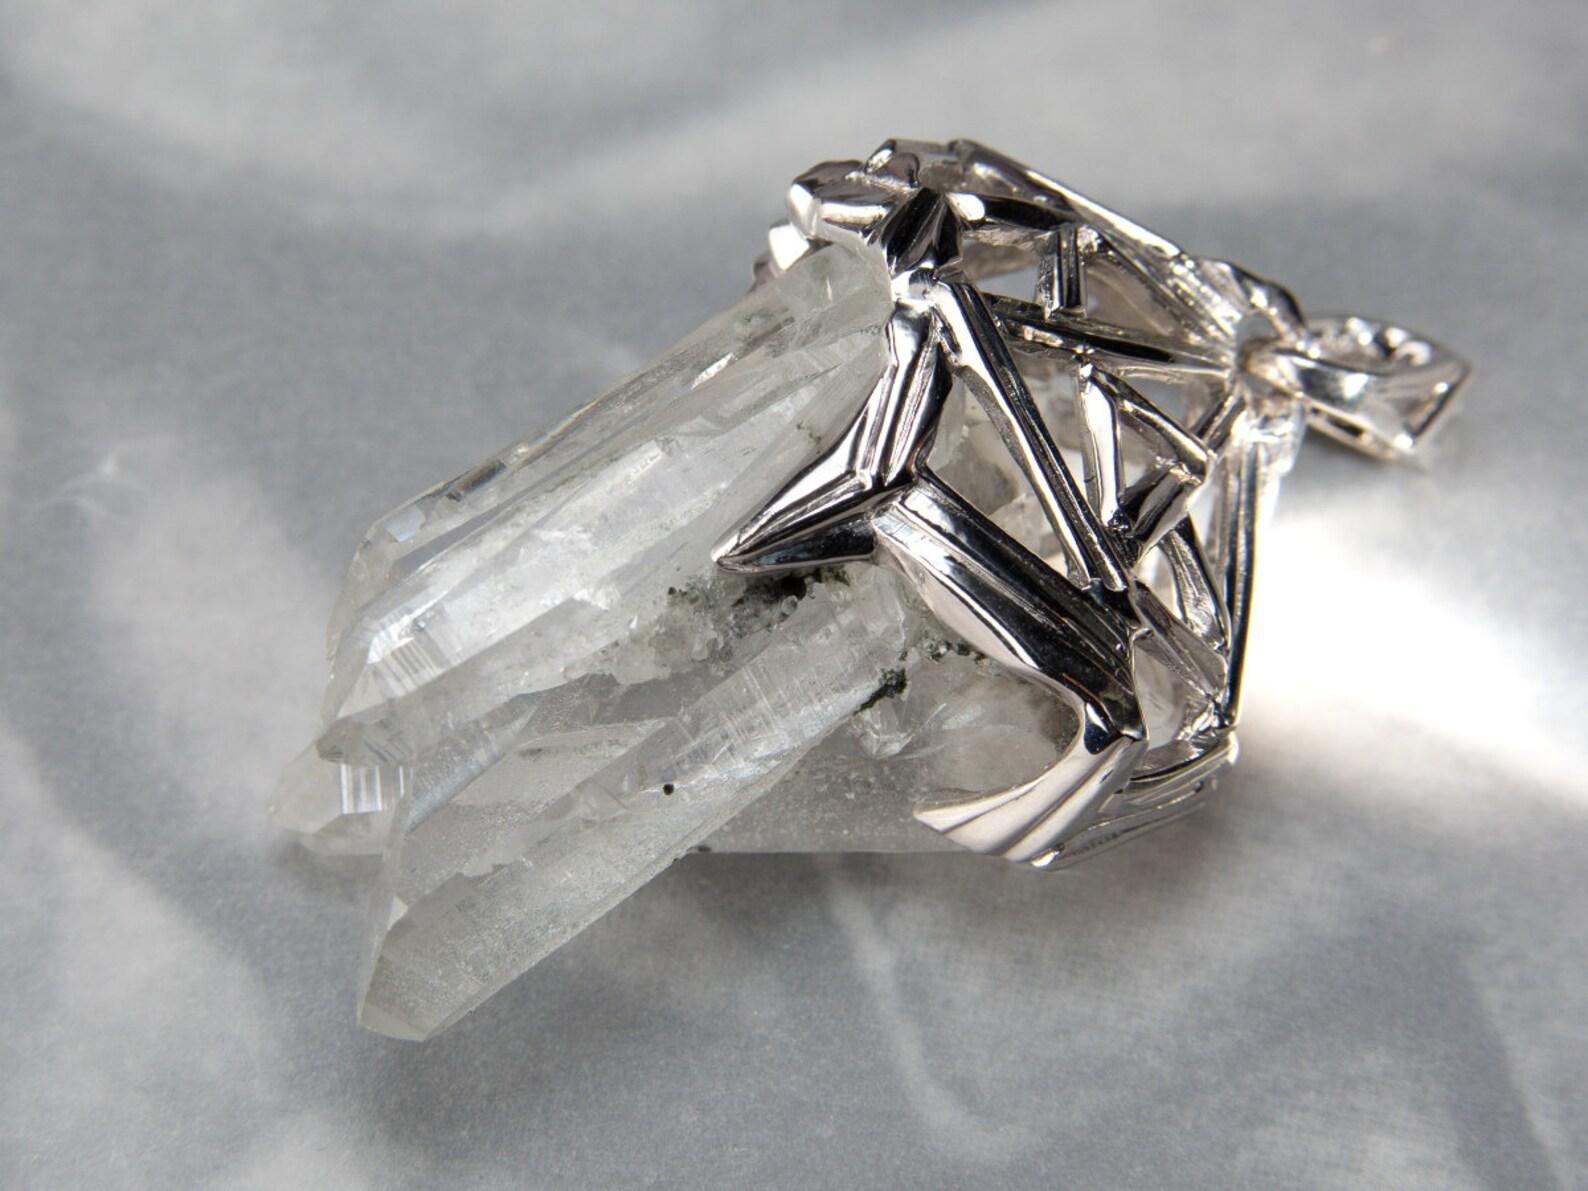 Silver pendant with natural Crystals Cluster of Rock Crystal
rock crystal origin - Brazil
crystals weight - 38 carats
crystals measurements - 0.79 х 1.22 in / 20 х 31 mm
pendant weight - 13.64 grams
pendant height - 1.77 in / 45 mm